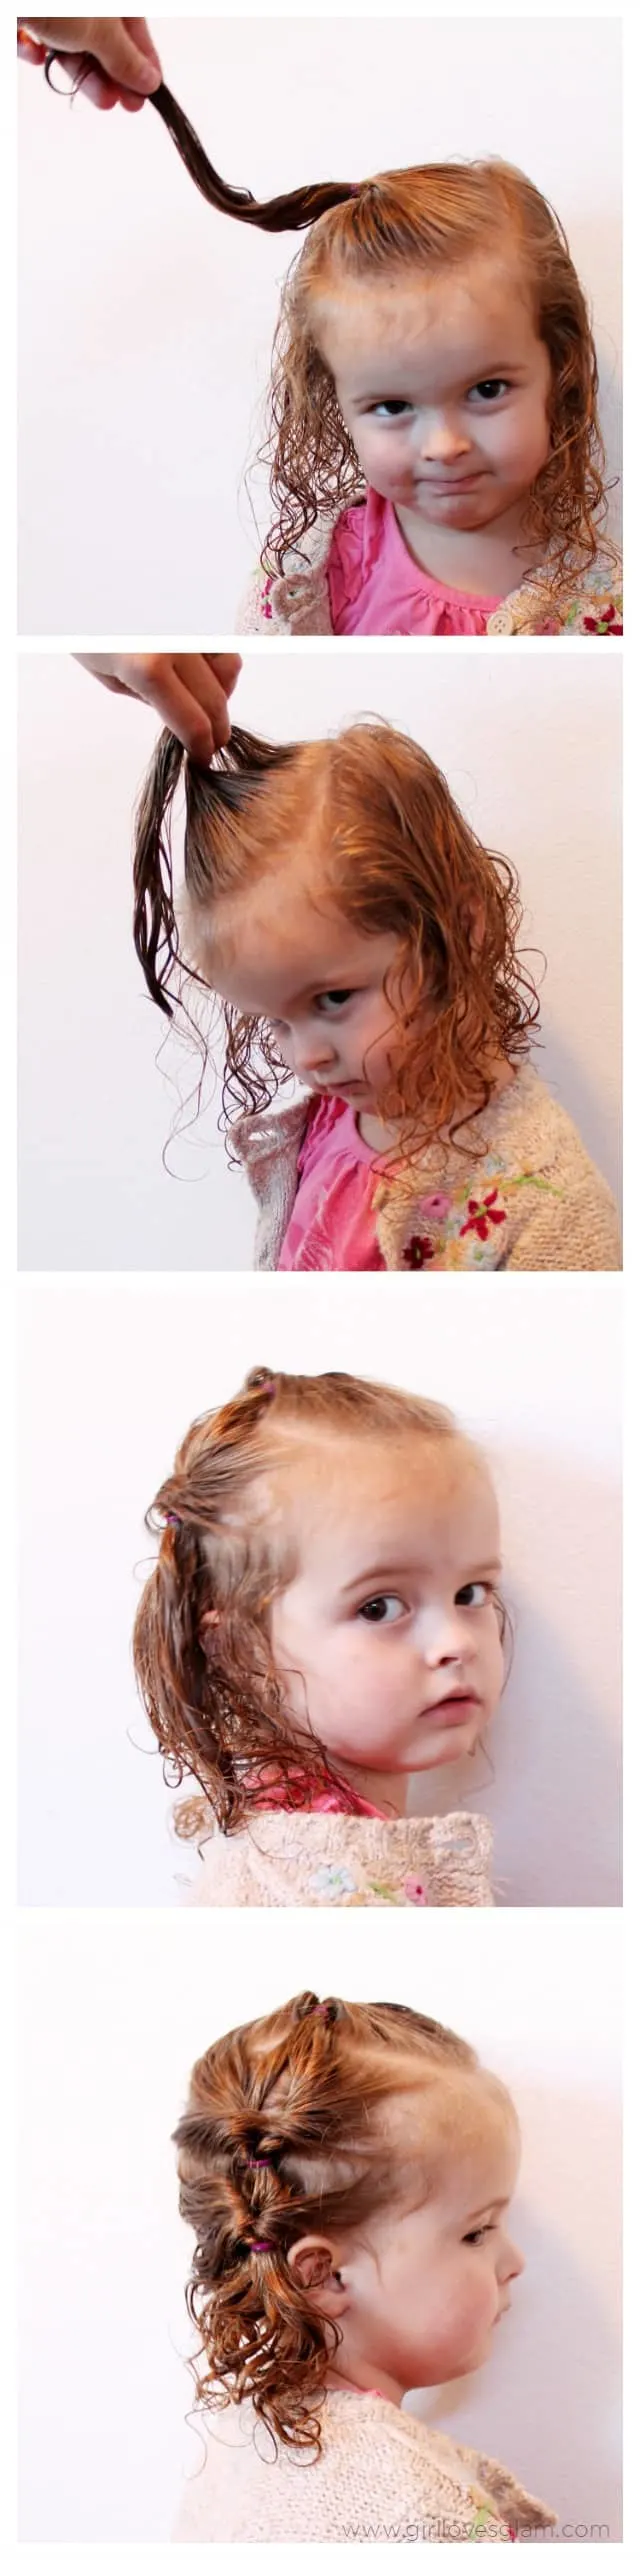 Easy Toddler Hairstyle on www.girllovesglam.com